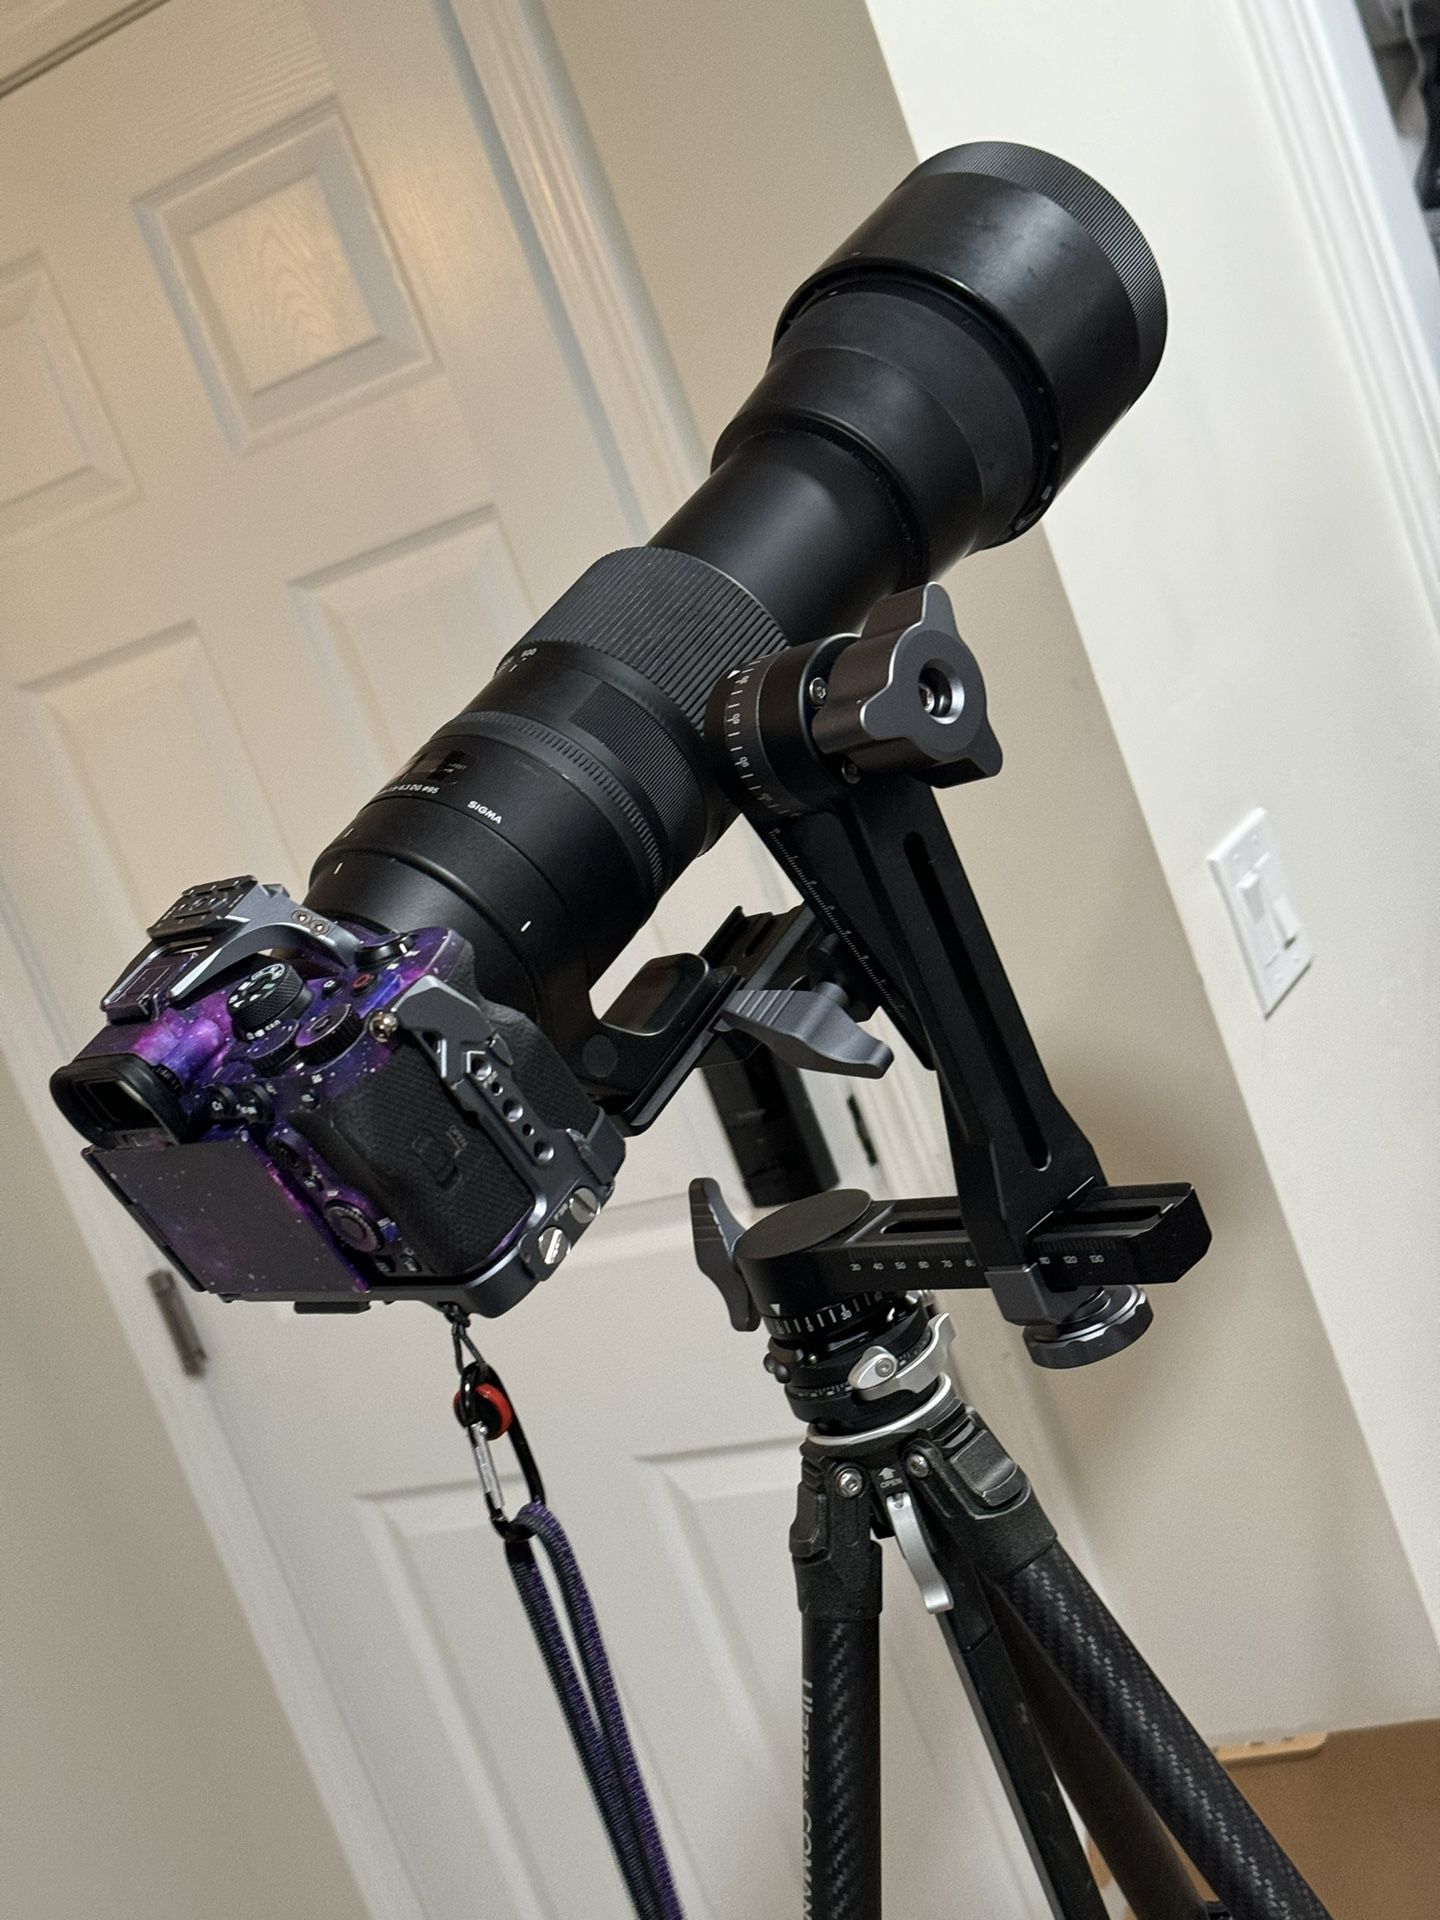 Sigma 150 600mm For Cannon Ef With Mc11 For Sony 